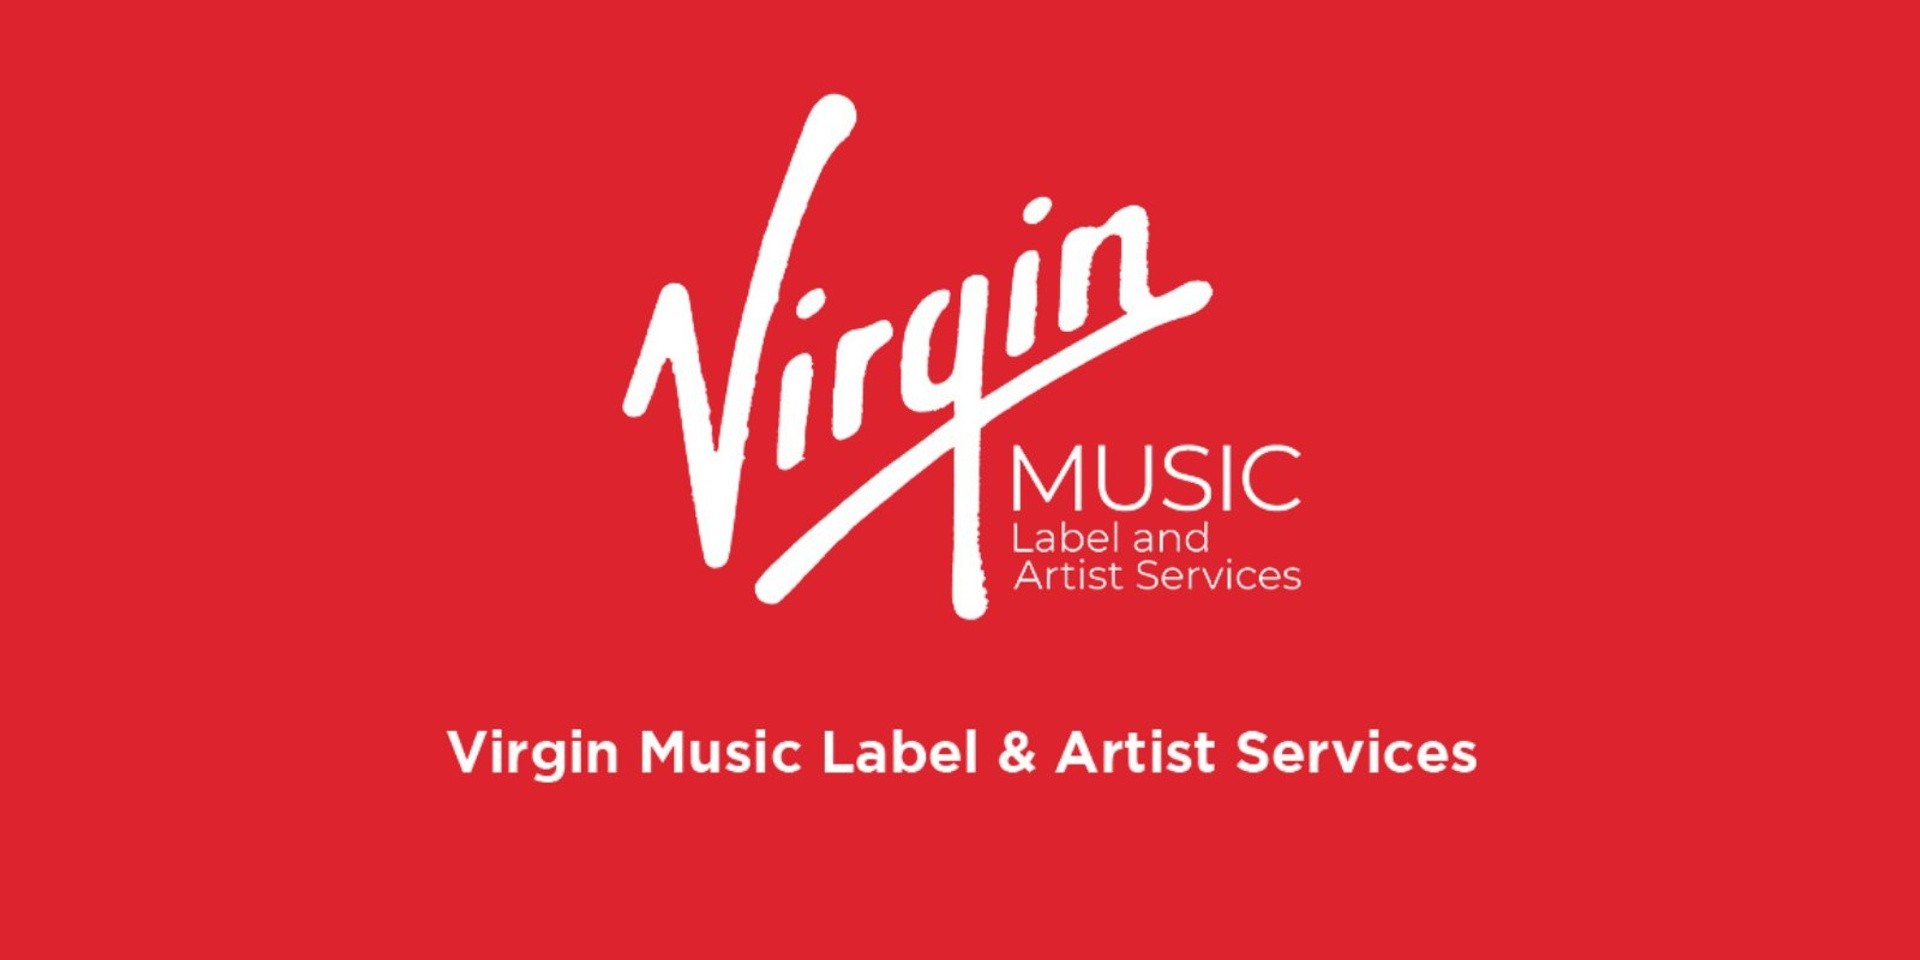 Universal Music Group launches  "a new global network" with Virgin Music Label and Artist